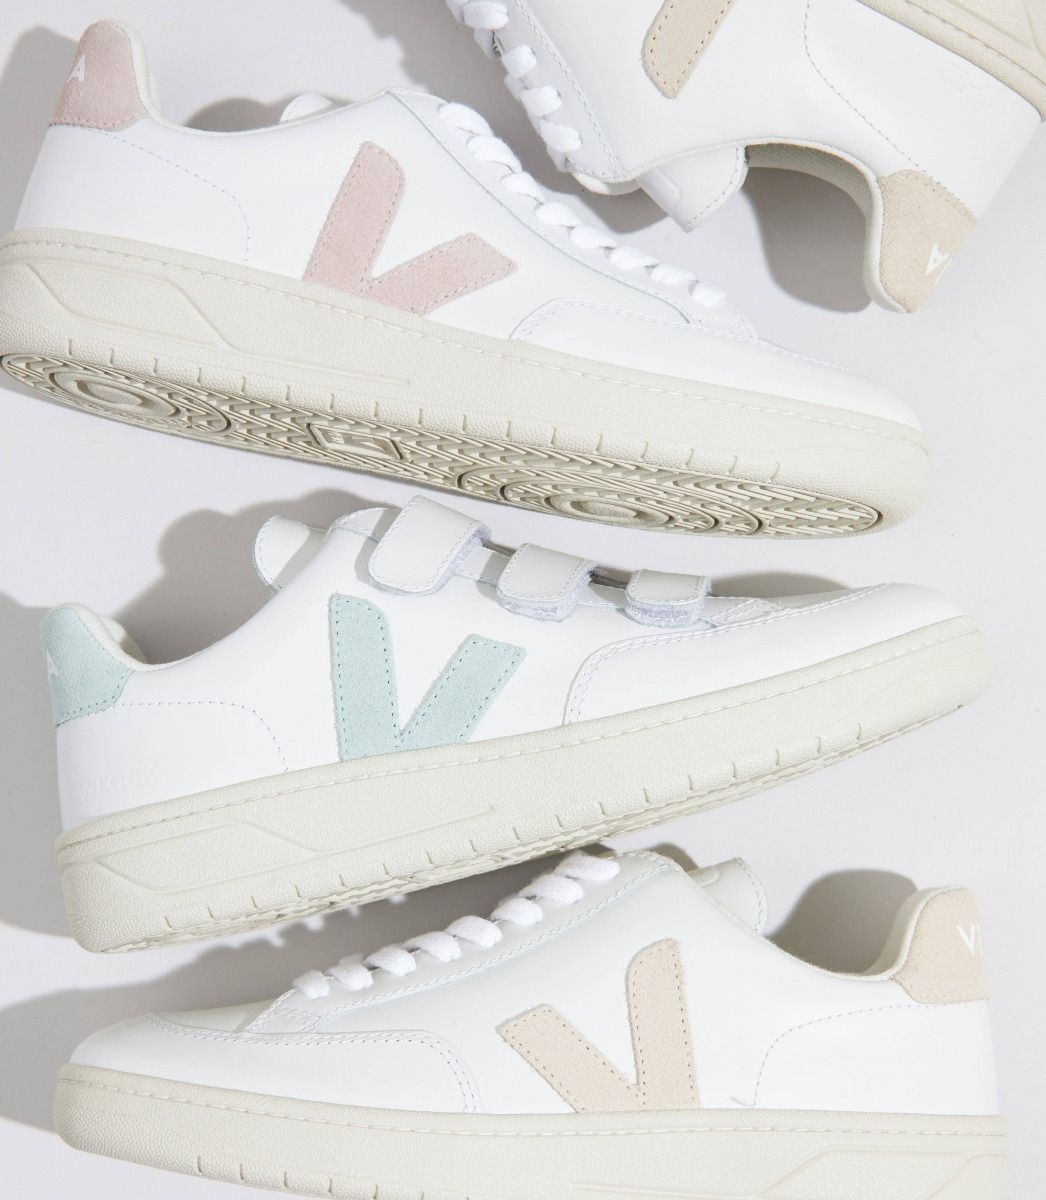 Veja - V-12 Leather Sneakers in Extra White Sable